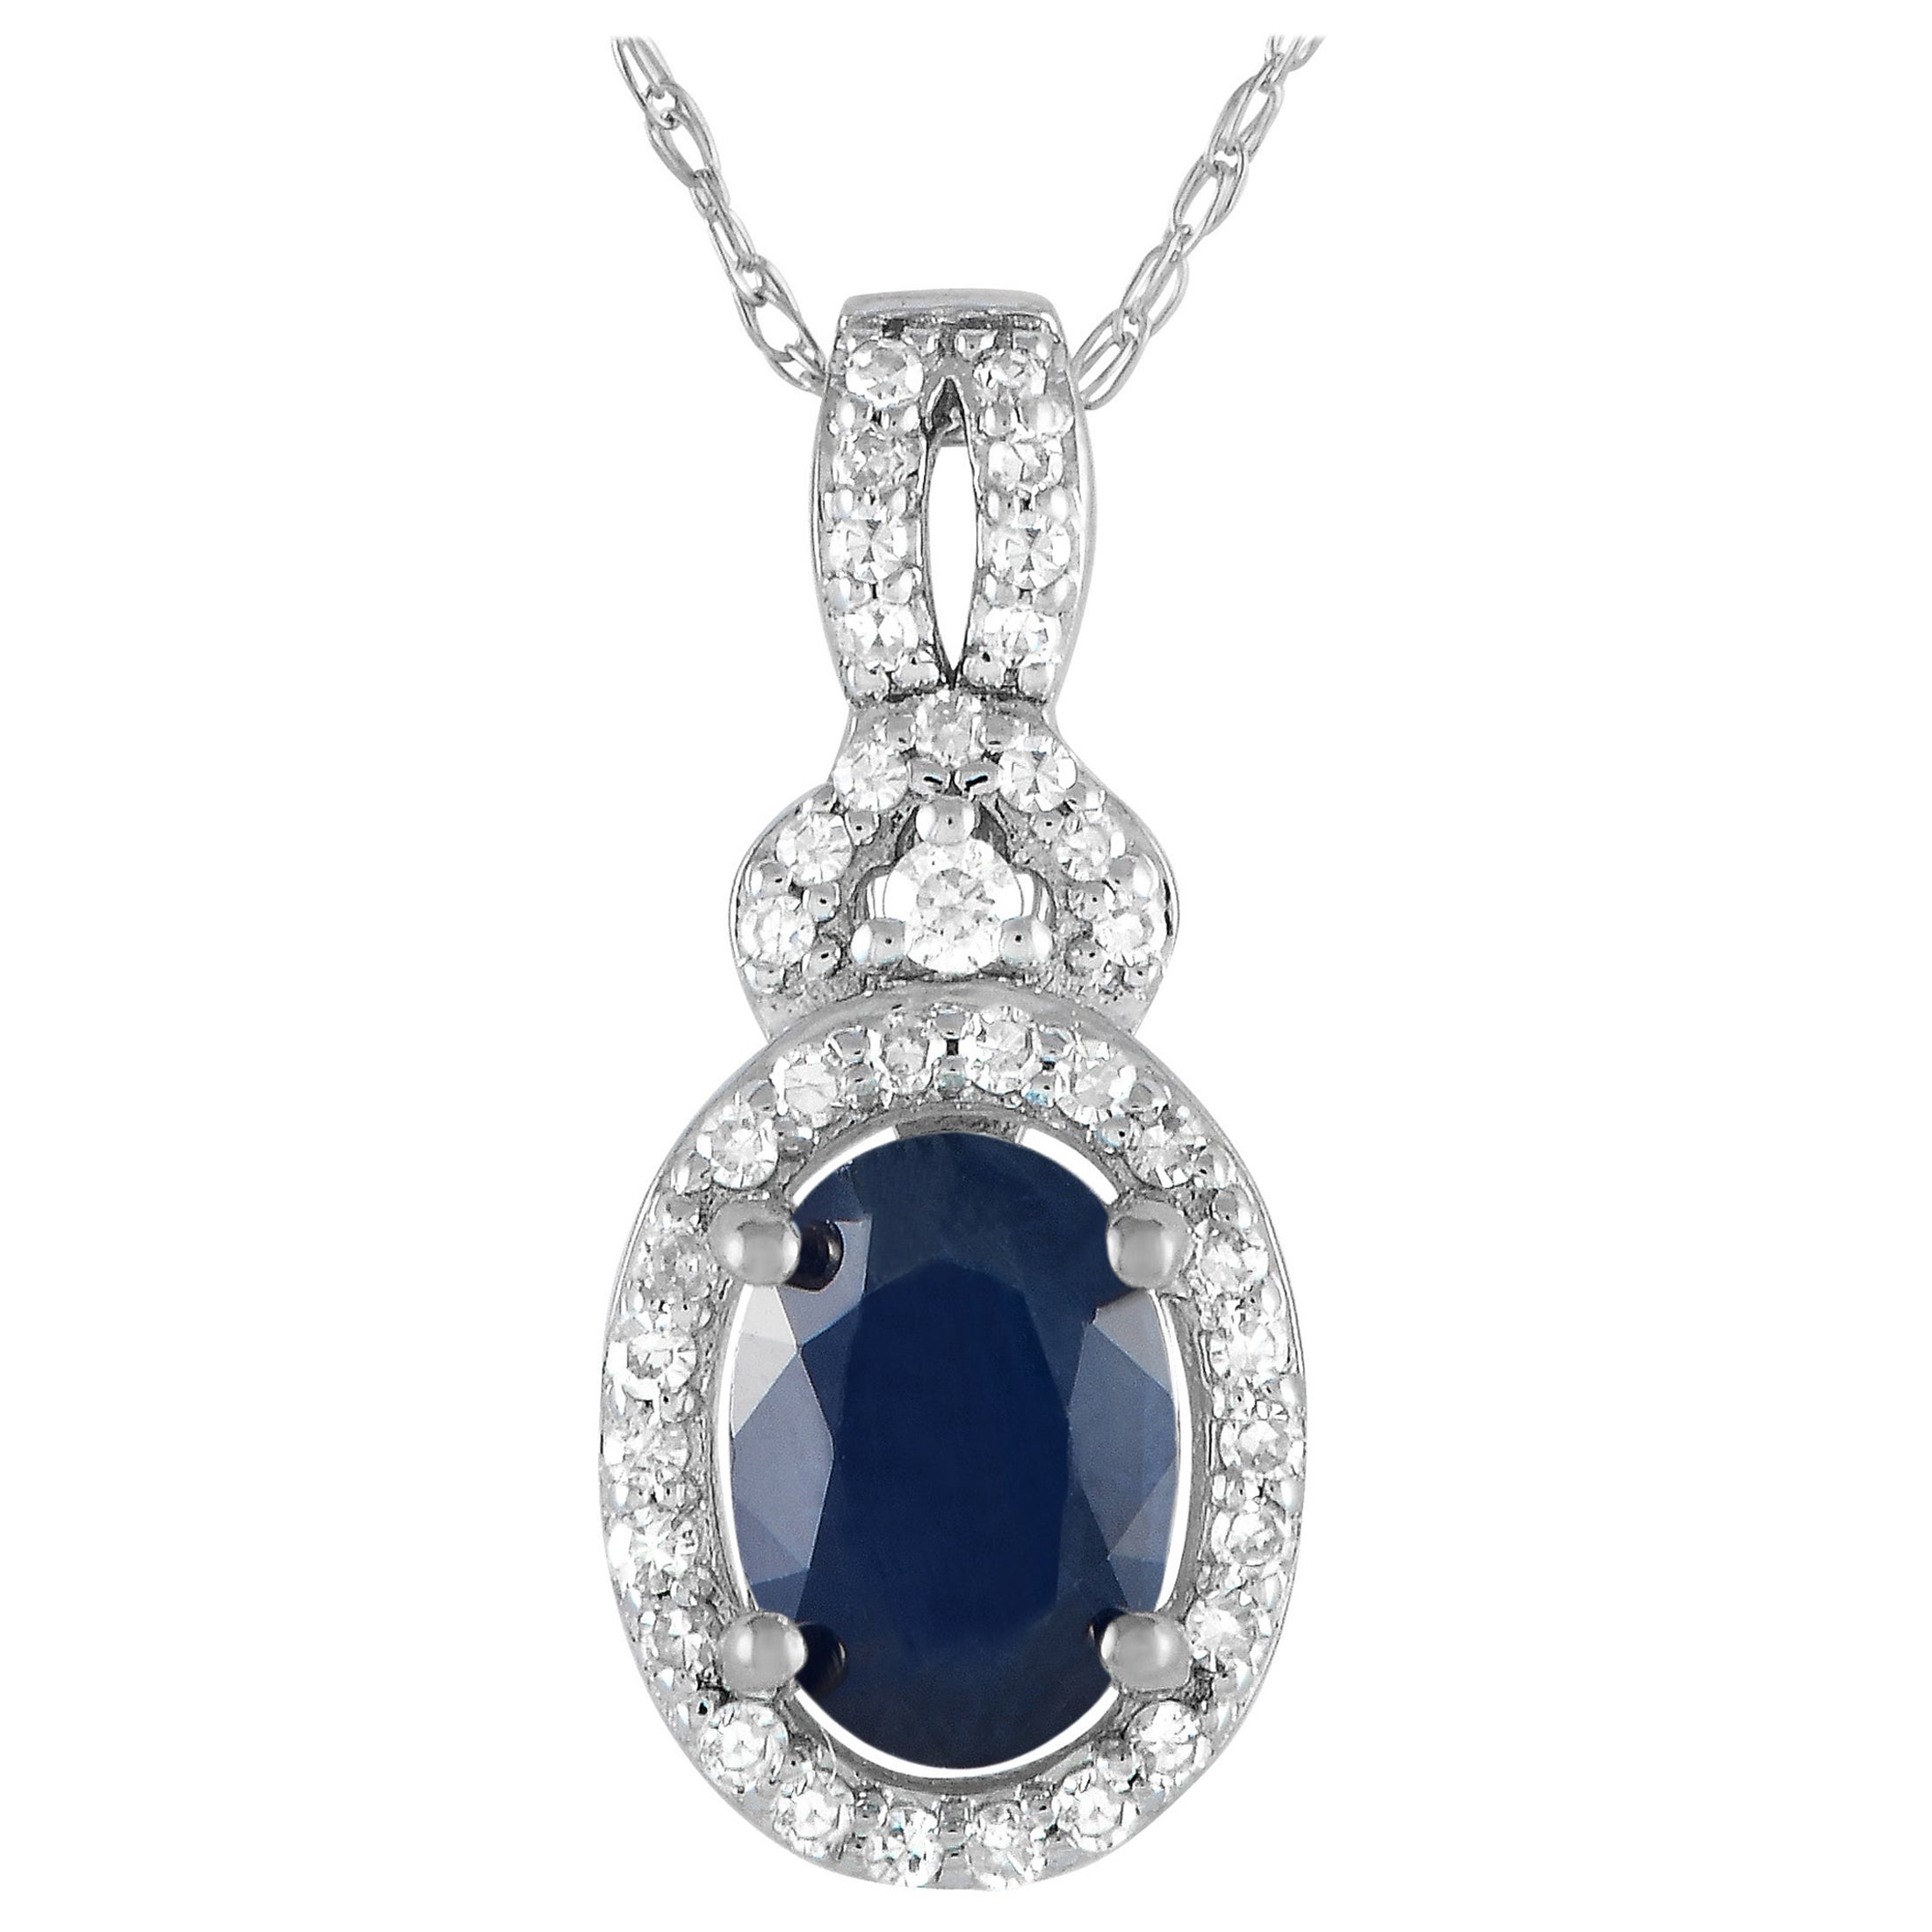 LB Exclusive 14K White Gold 0.15ct Diamond and Sapphire Necklace PD4-15738WSA For Sale